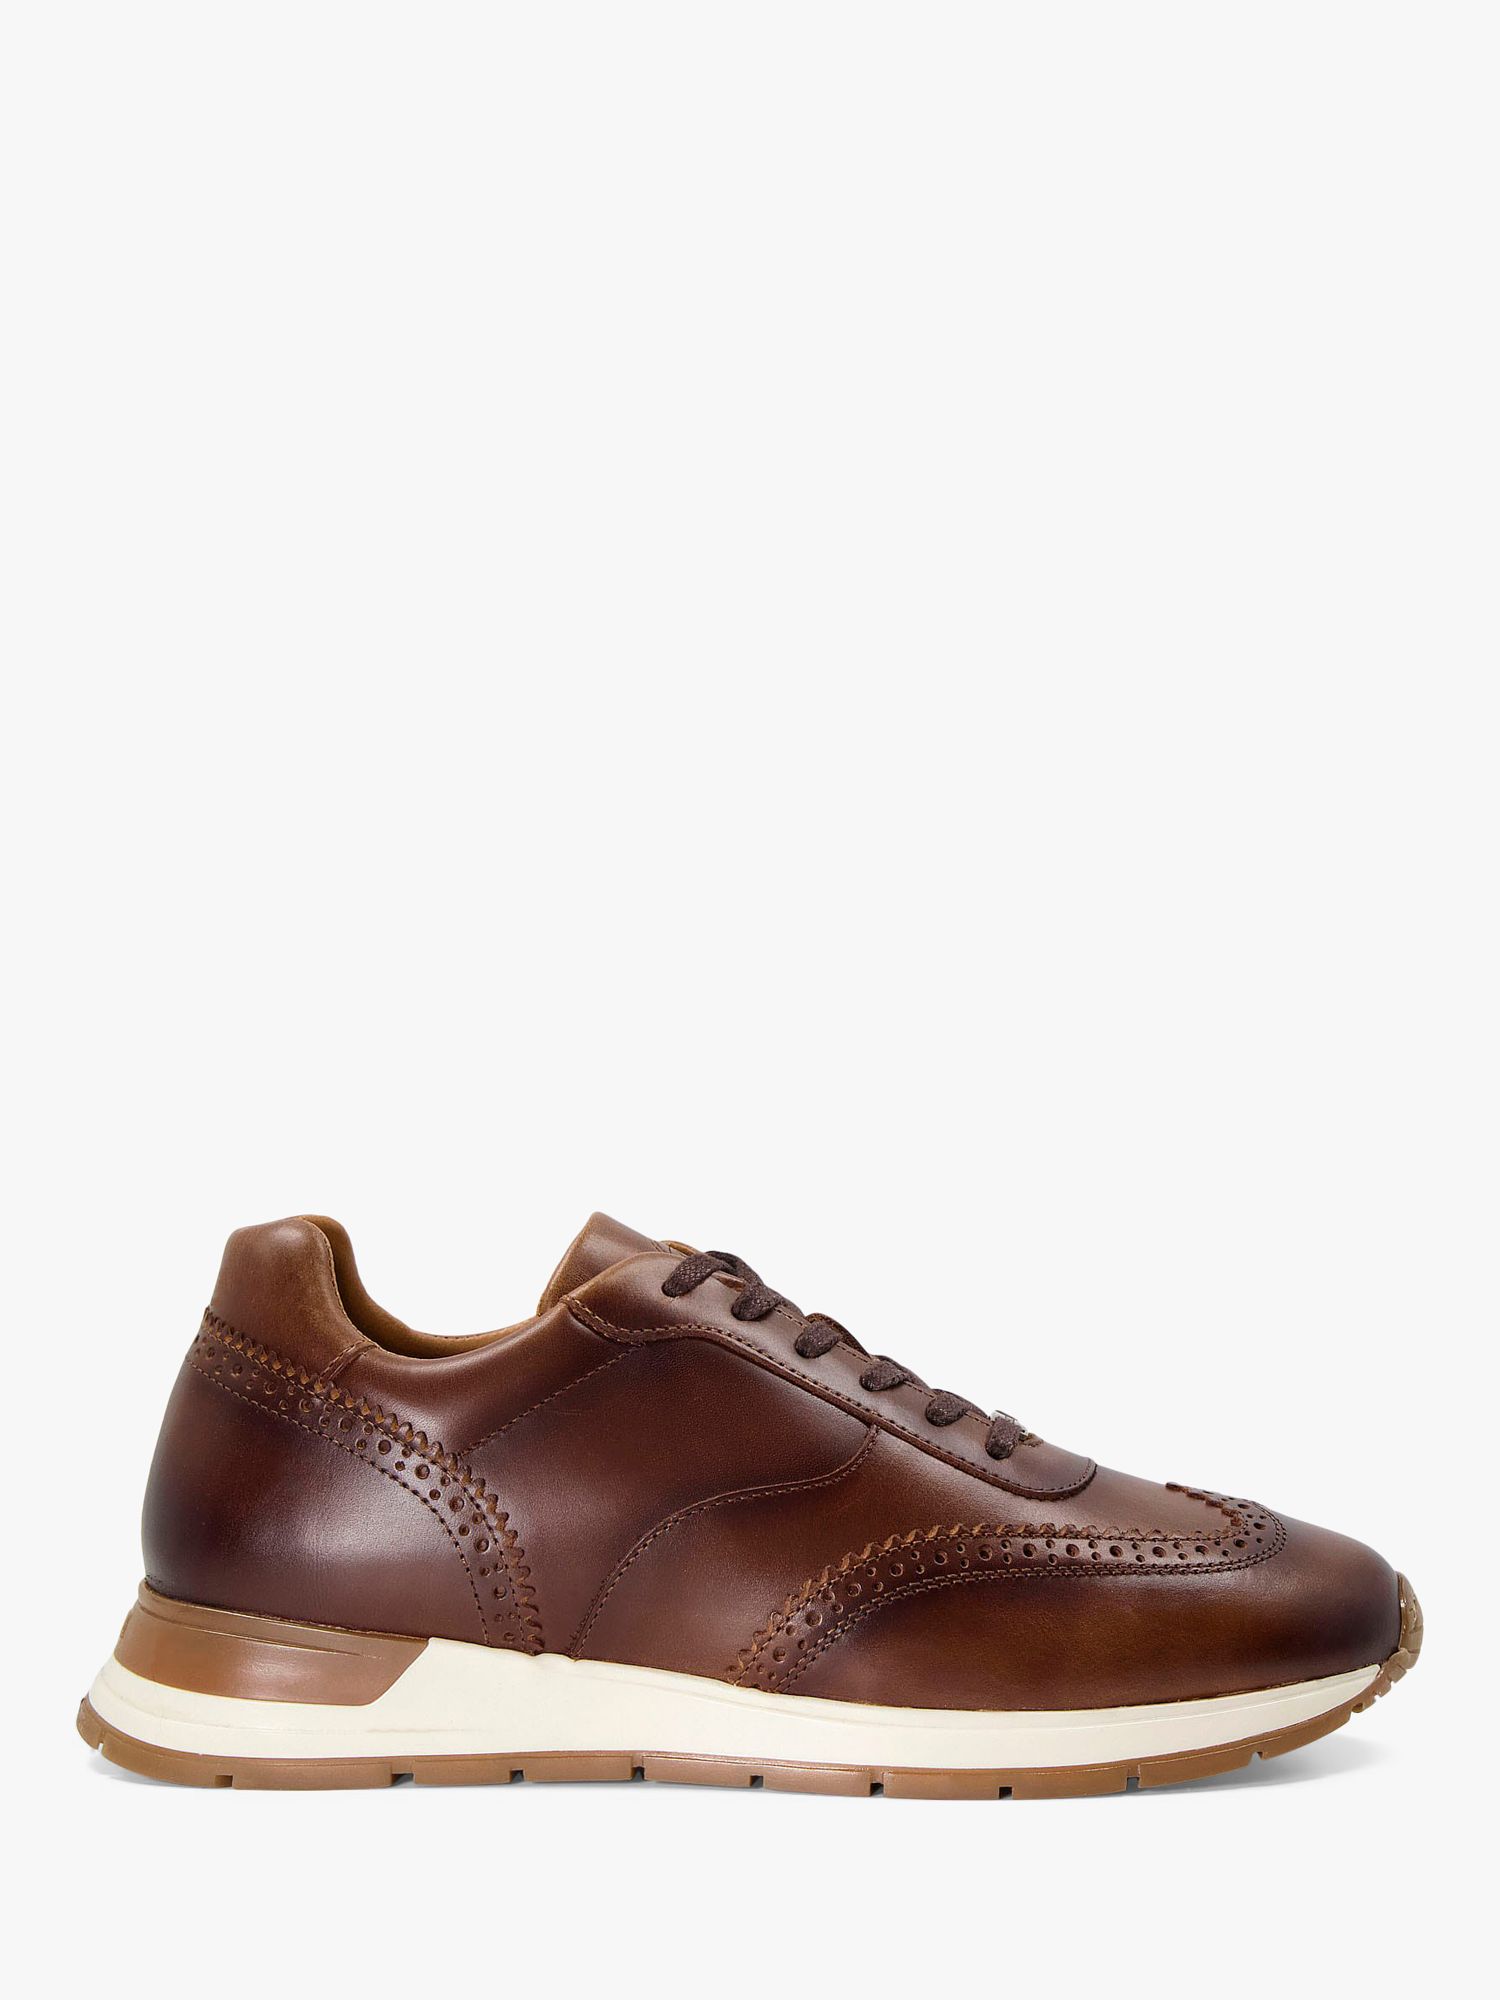 Dune Tomos Leather Lace Up Brogue Trainers, Tan at John Lewis & Partners